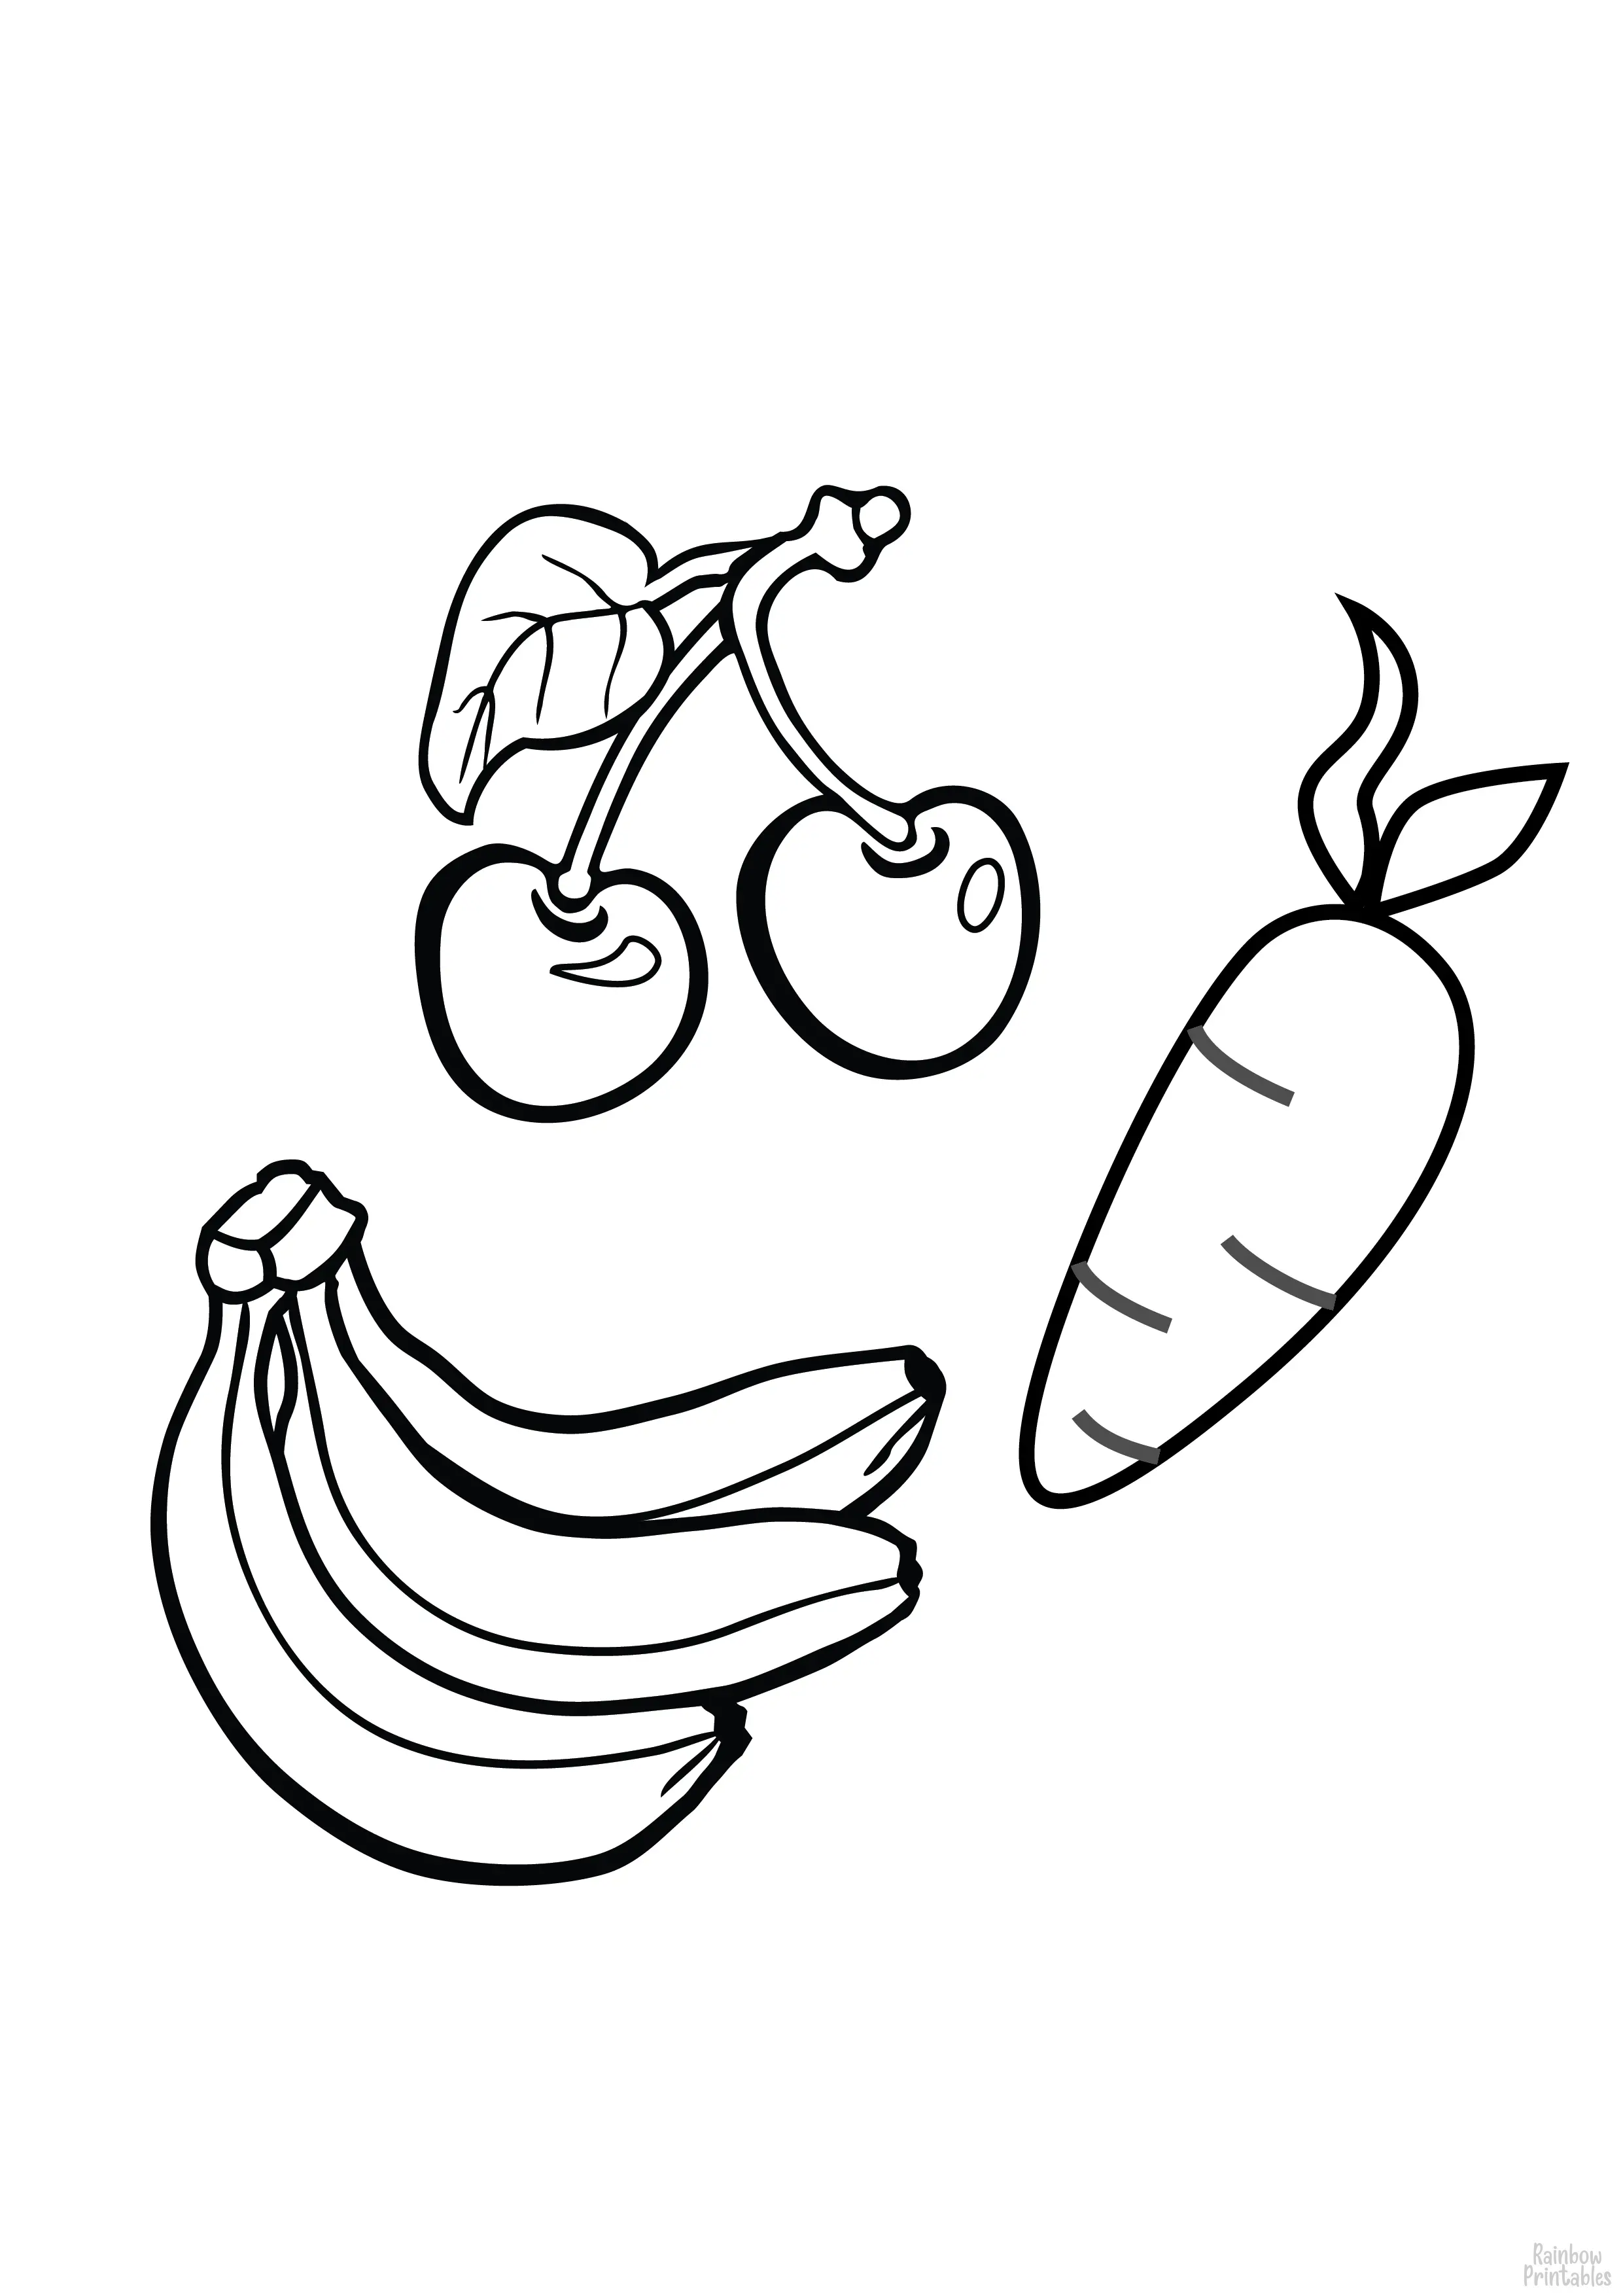 FOOD COLLECTION CHERRY CARROT BAnana Clipart Coloring Pages Line Art Drawings for Kids-01